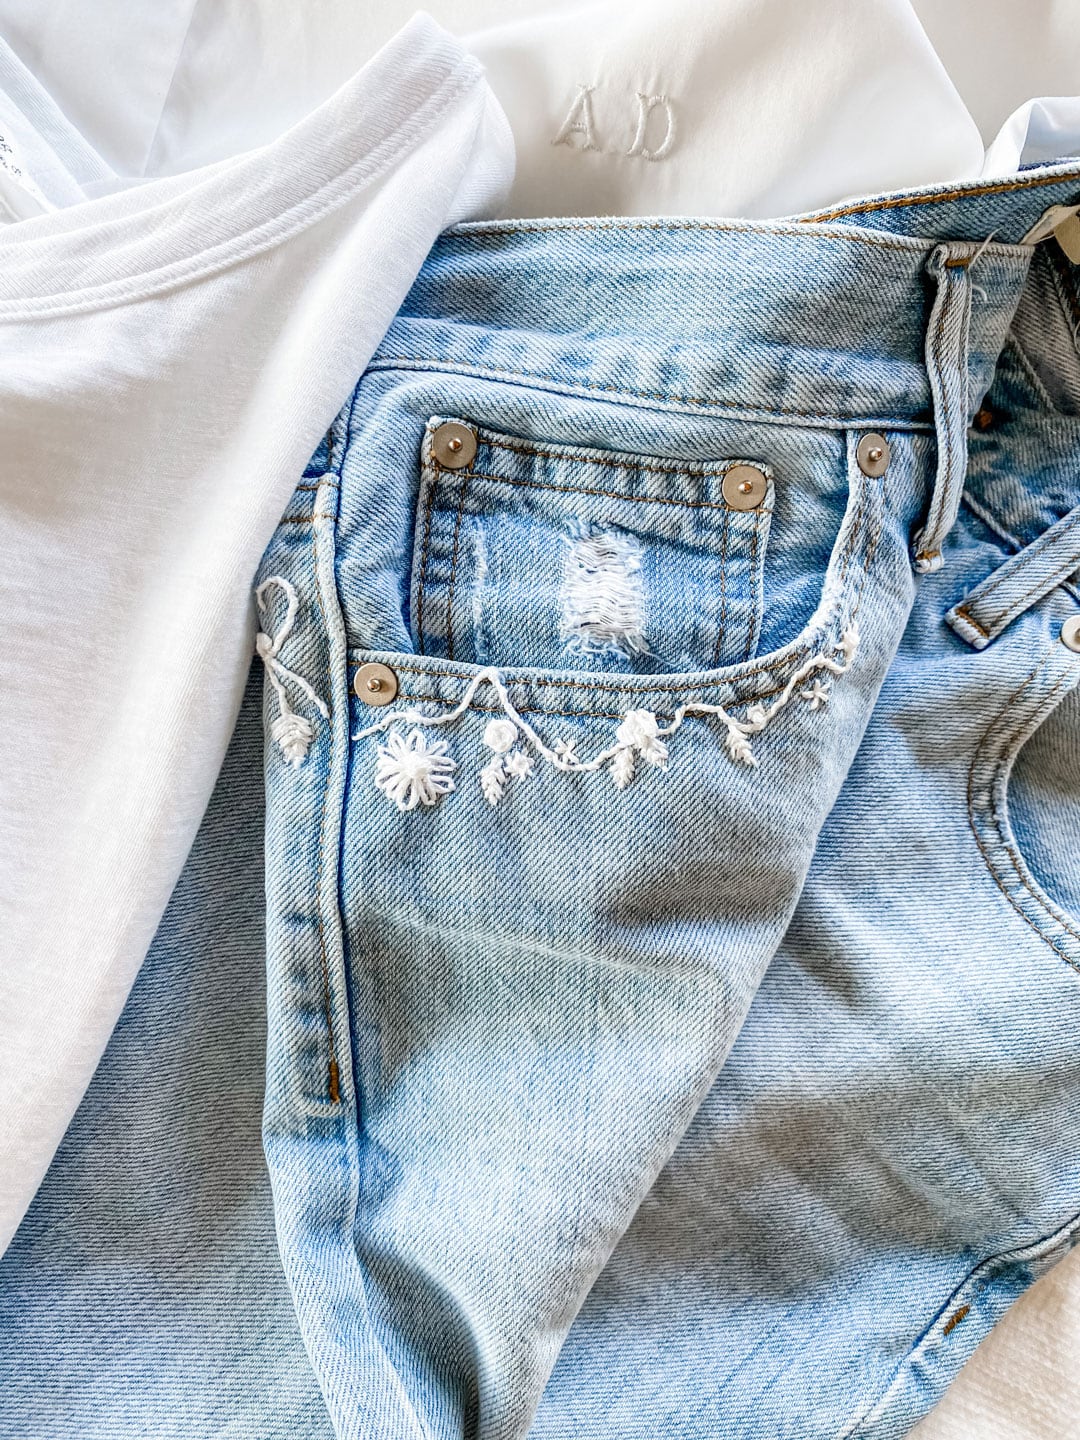 Lifestyle blogger Annie Diamond shares her new favorite embroidered jeans